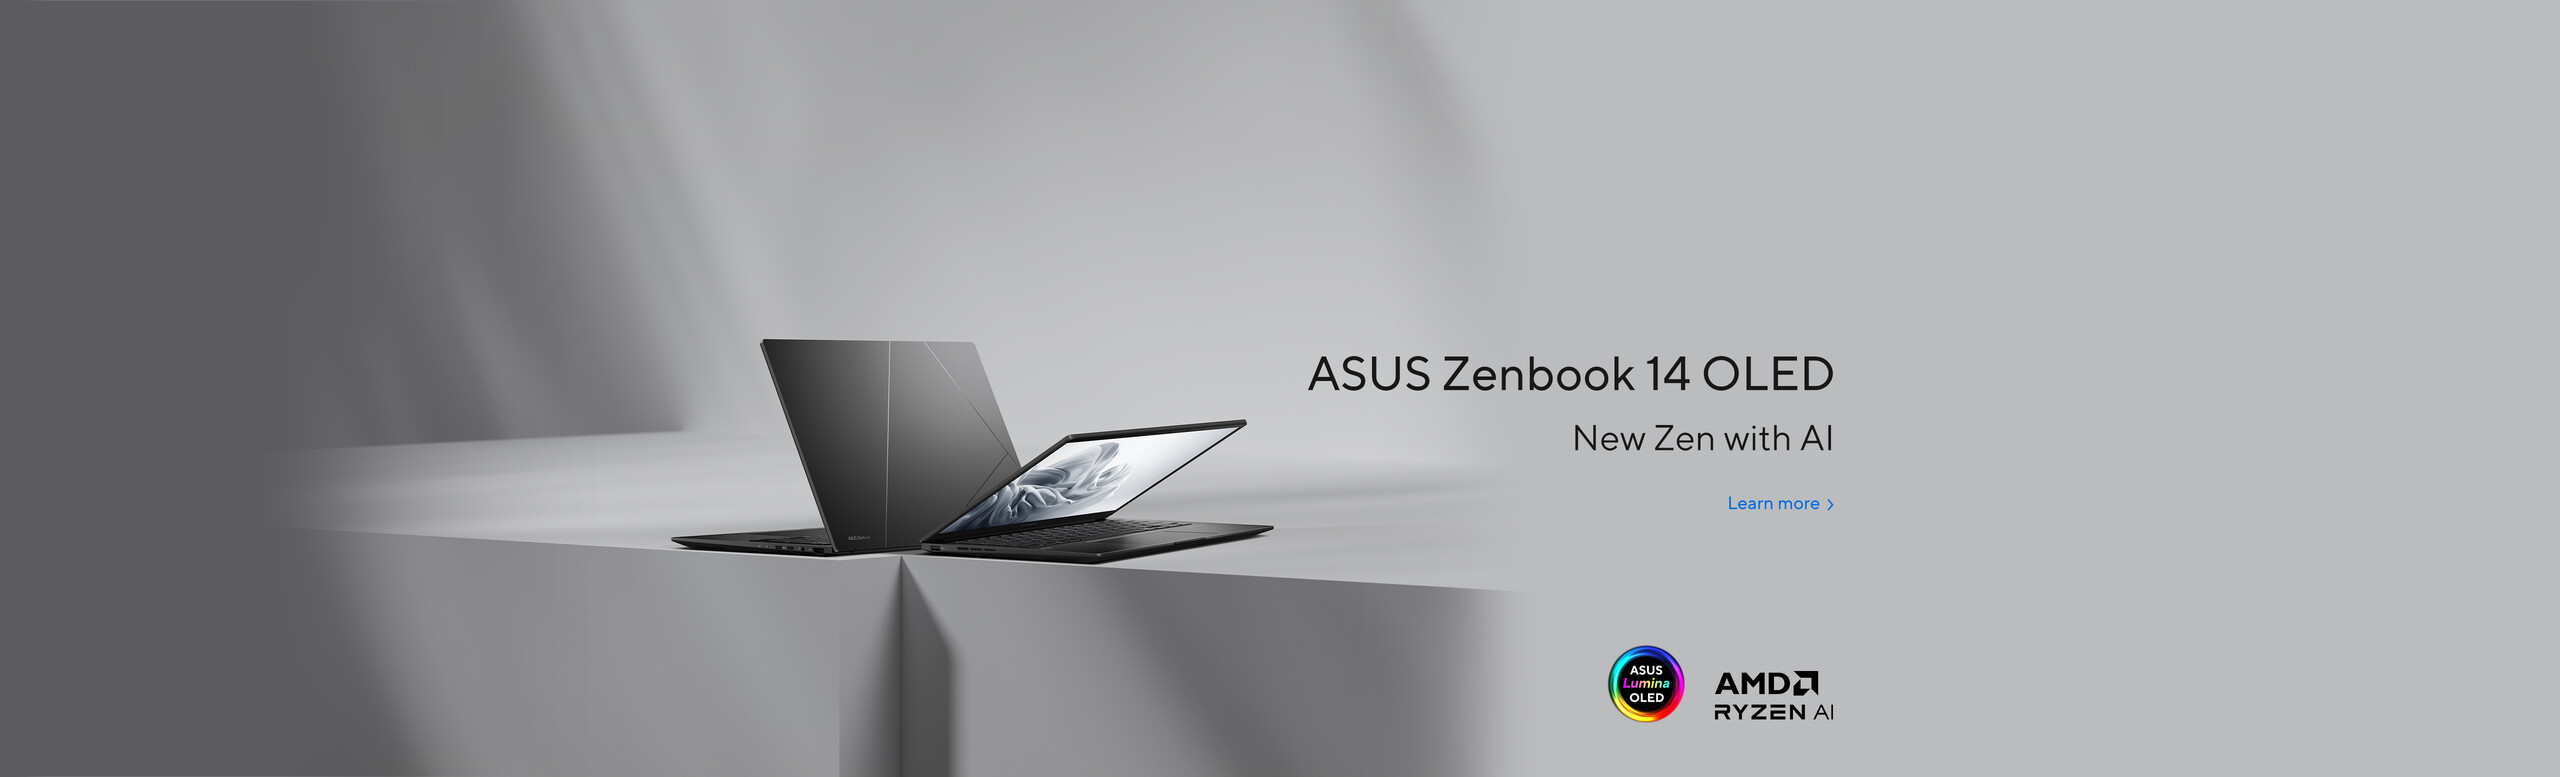 Image of  Zenbook 14 OLED (UM3406) laptops New Zen with AI Learn more